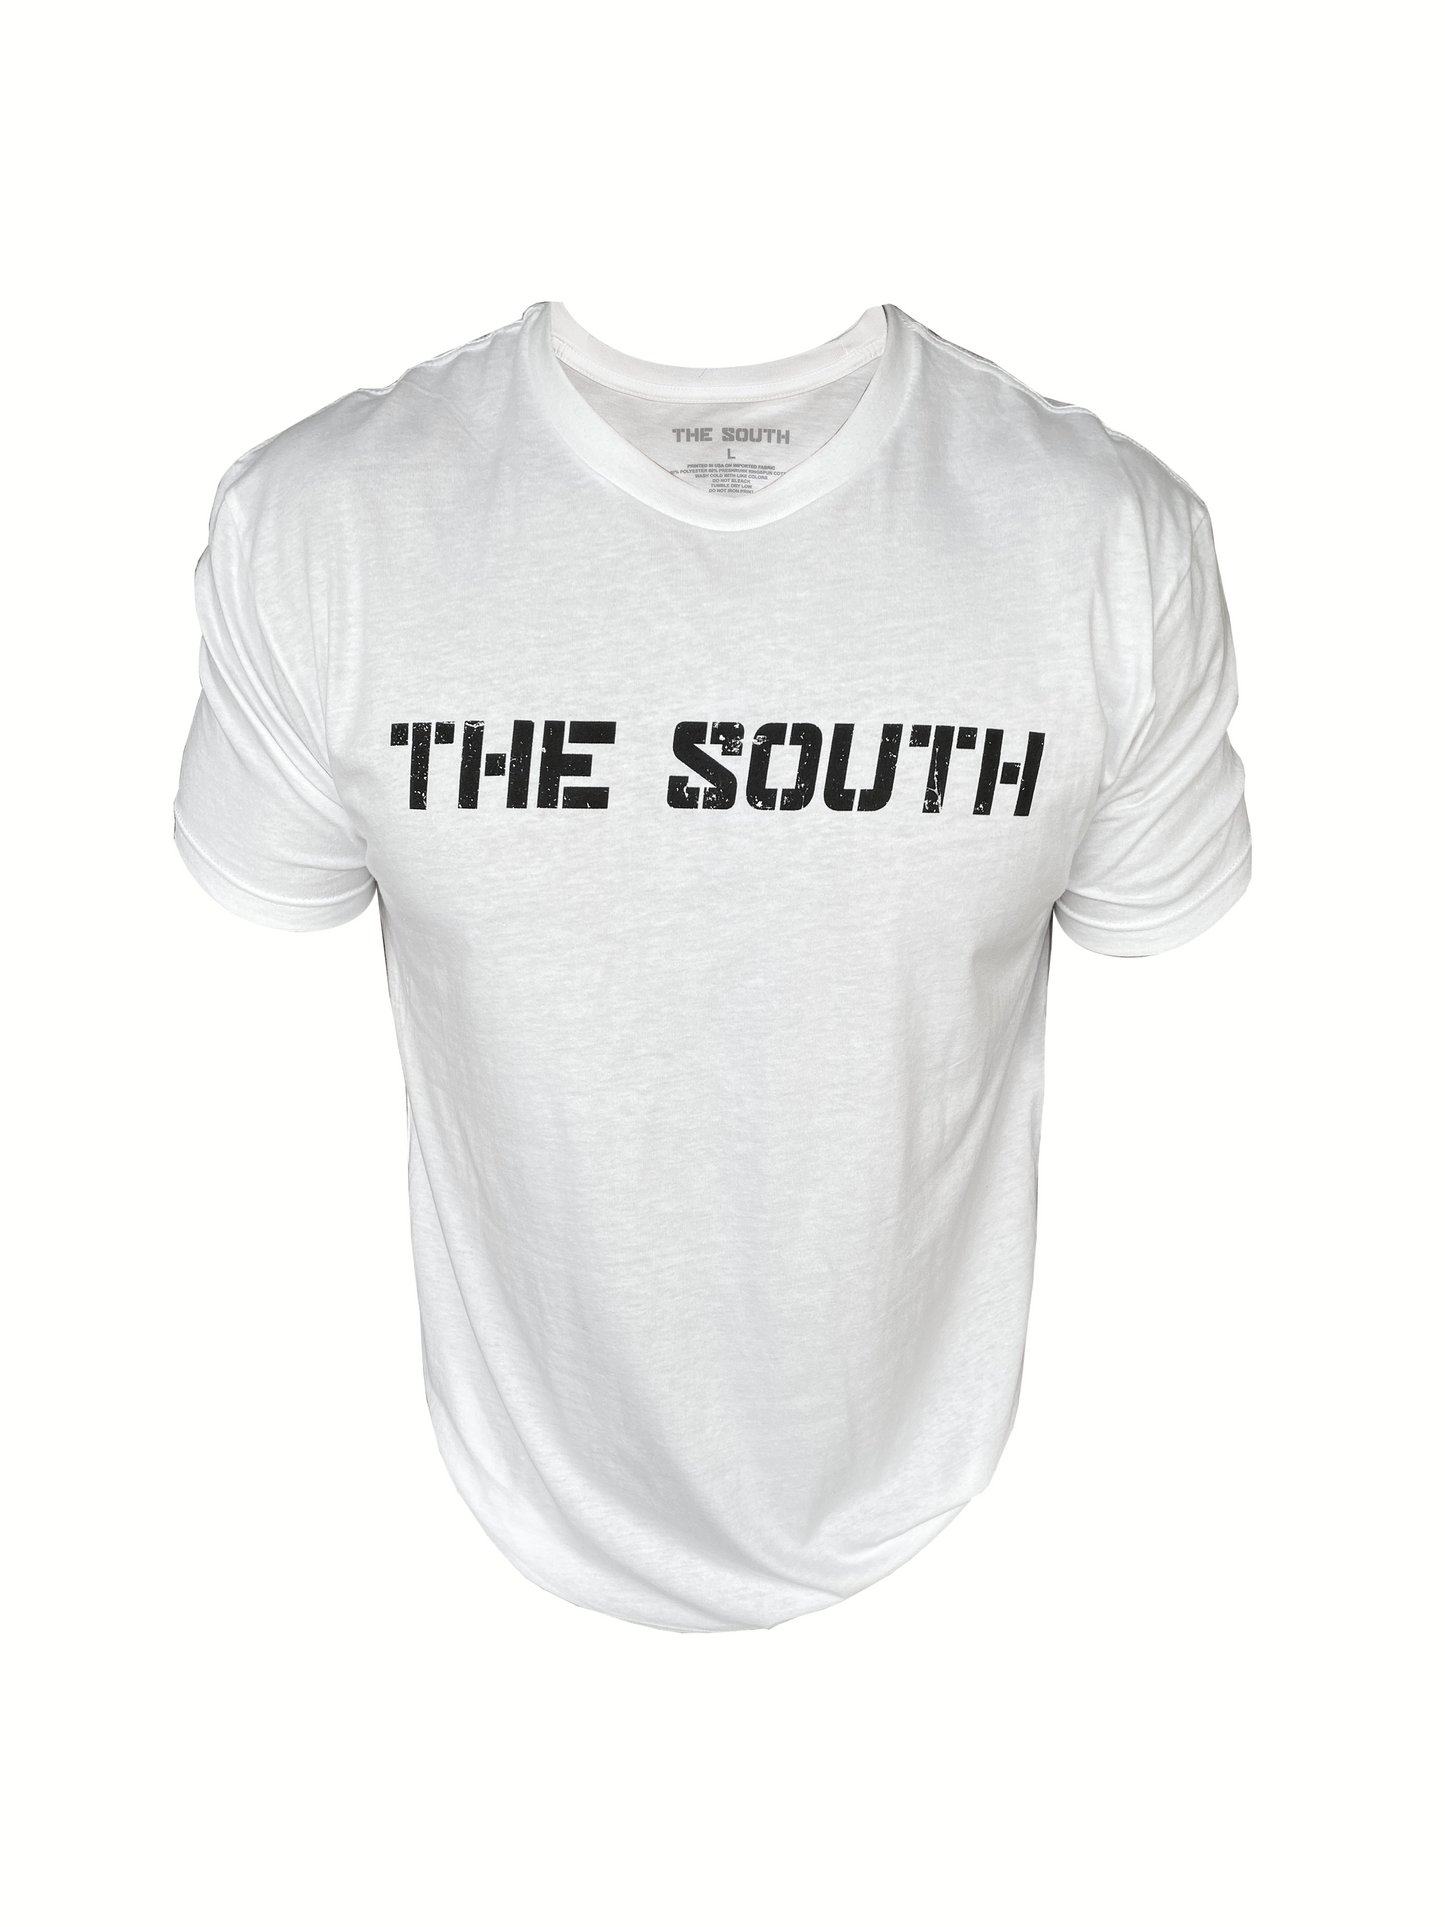 White Performance Tee - The South